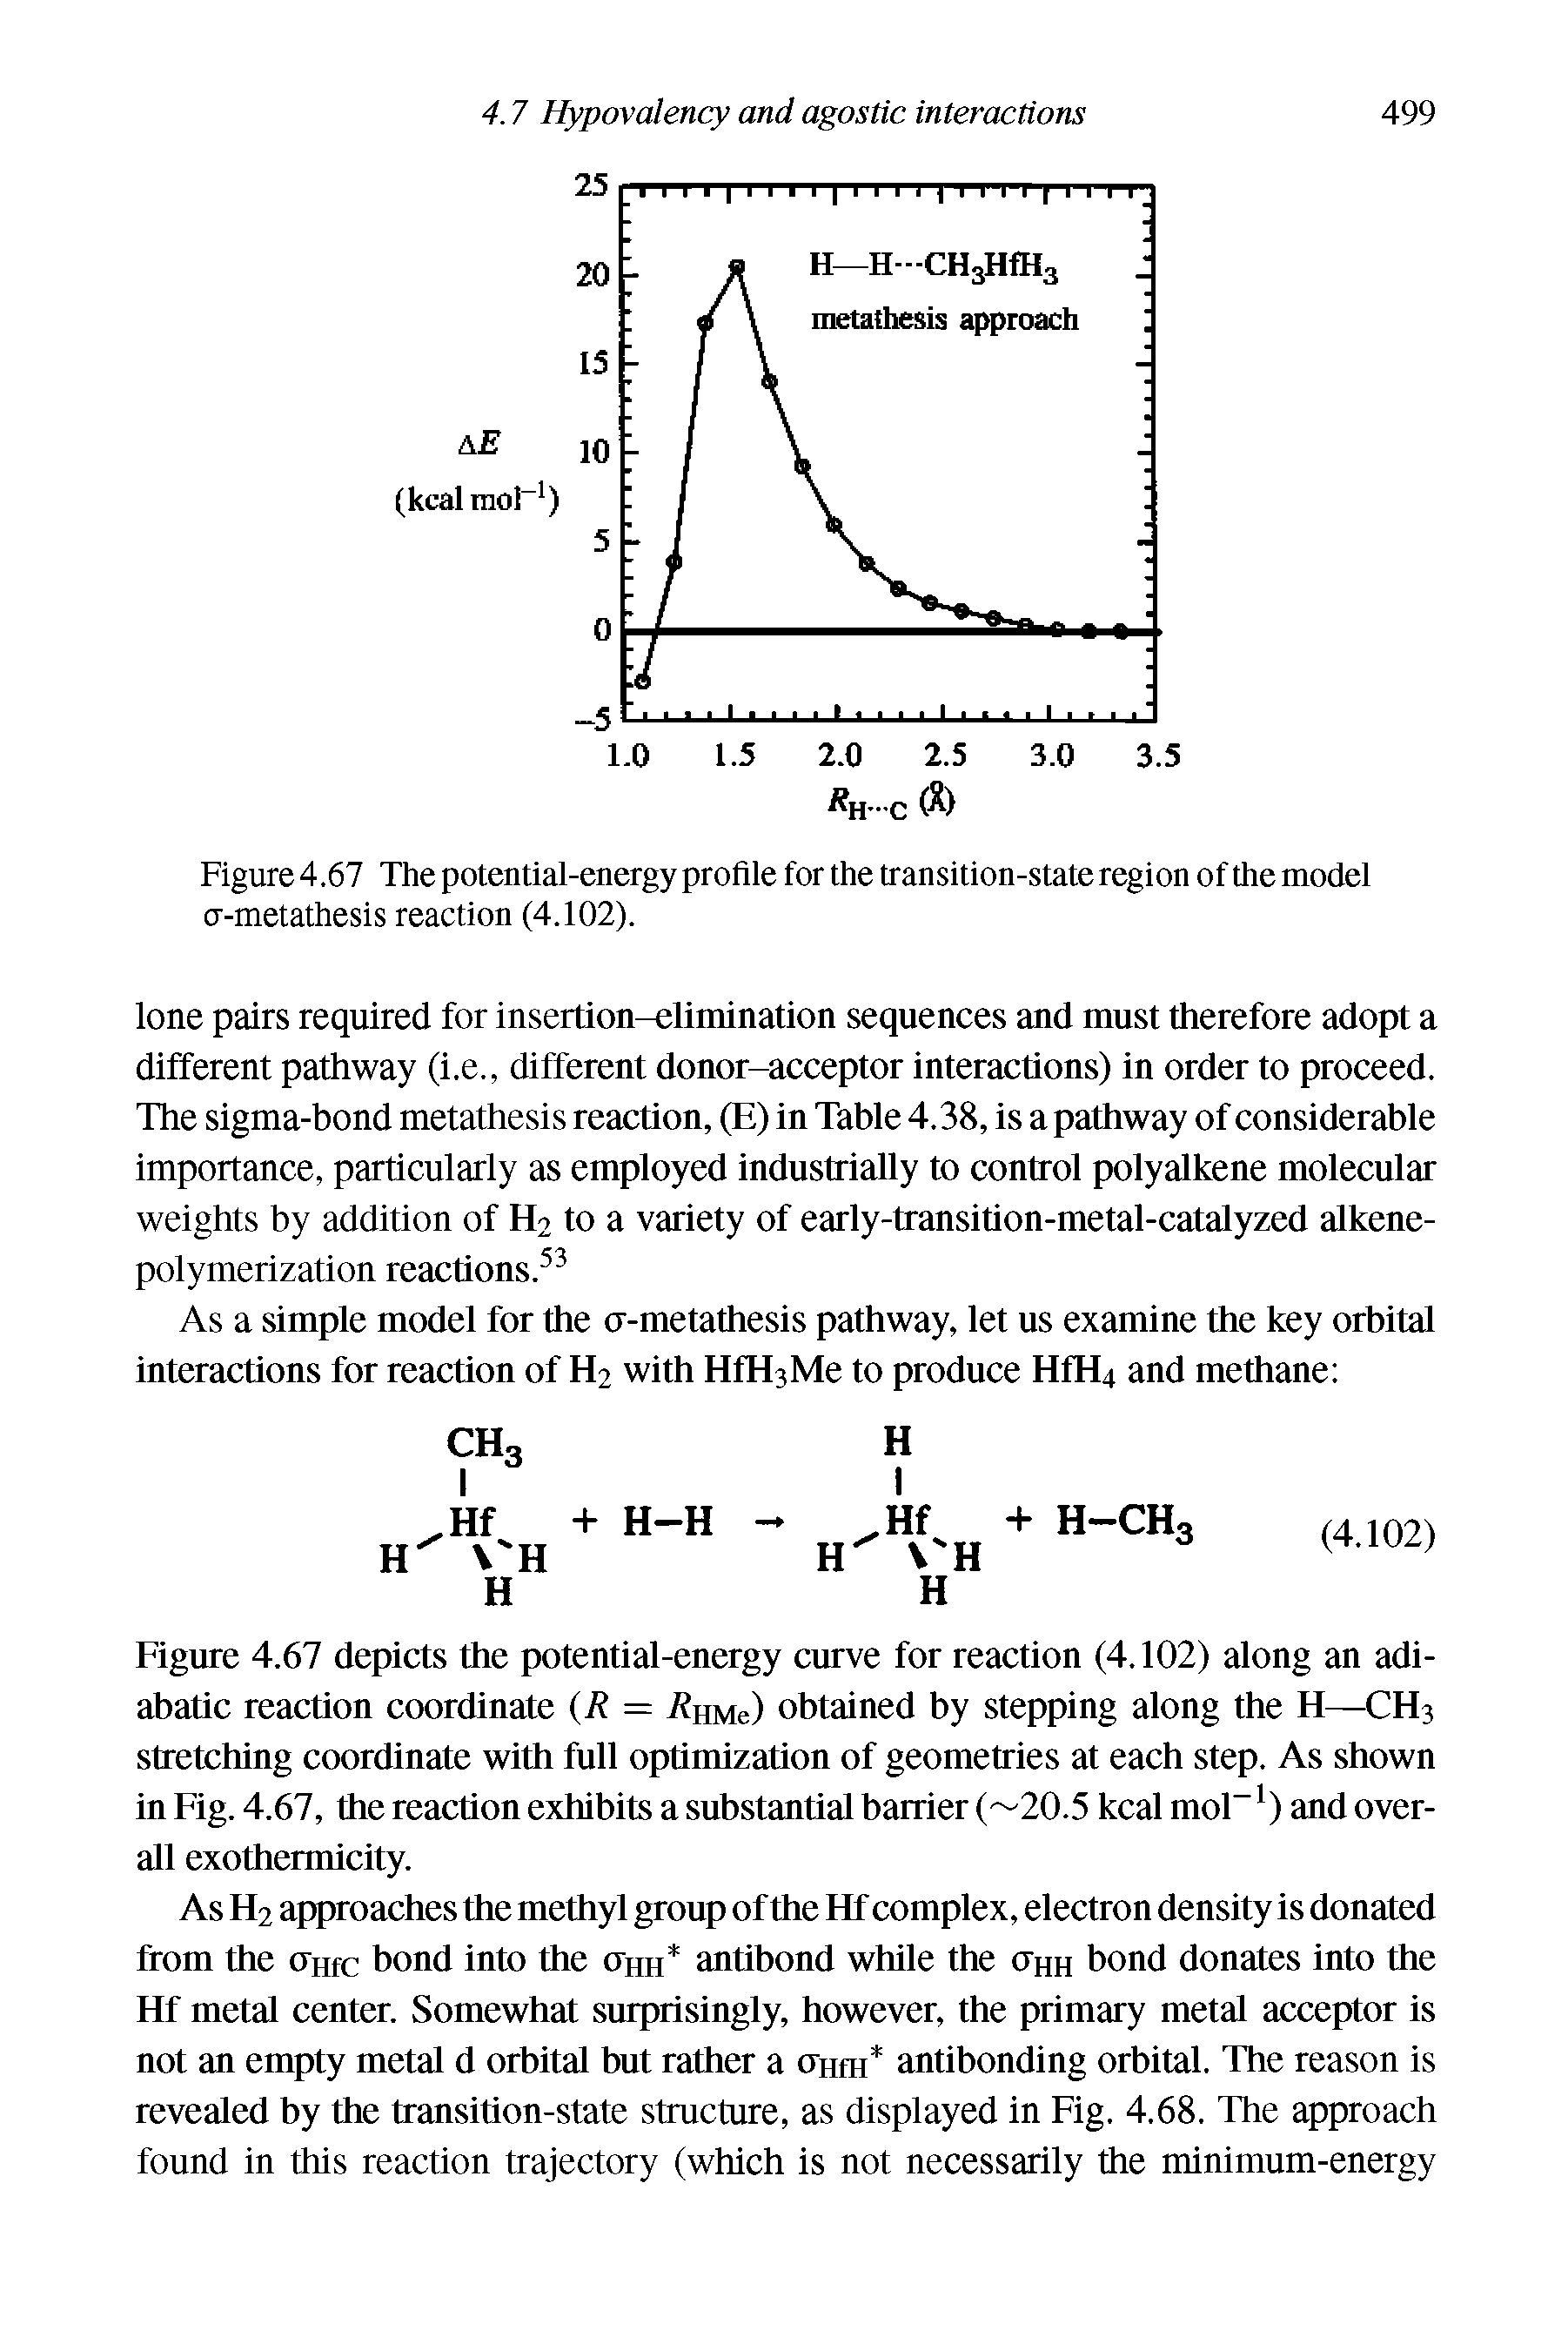 Figure 4.67 The potential-energy profile for the transition-state region of the model c-metathesis reaction (4.102).